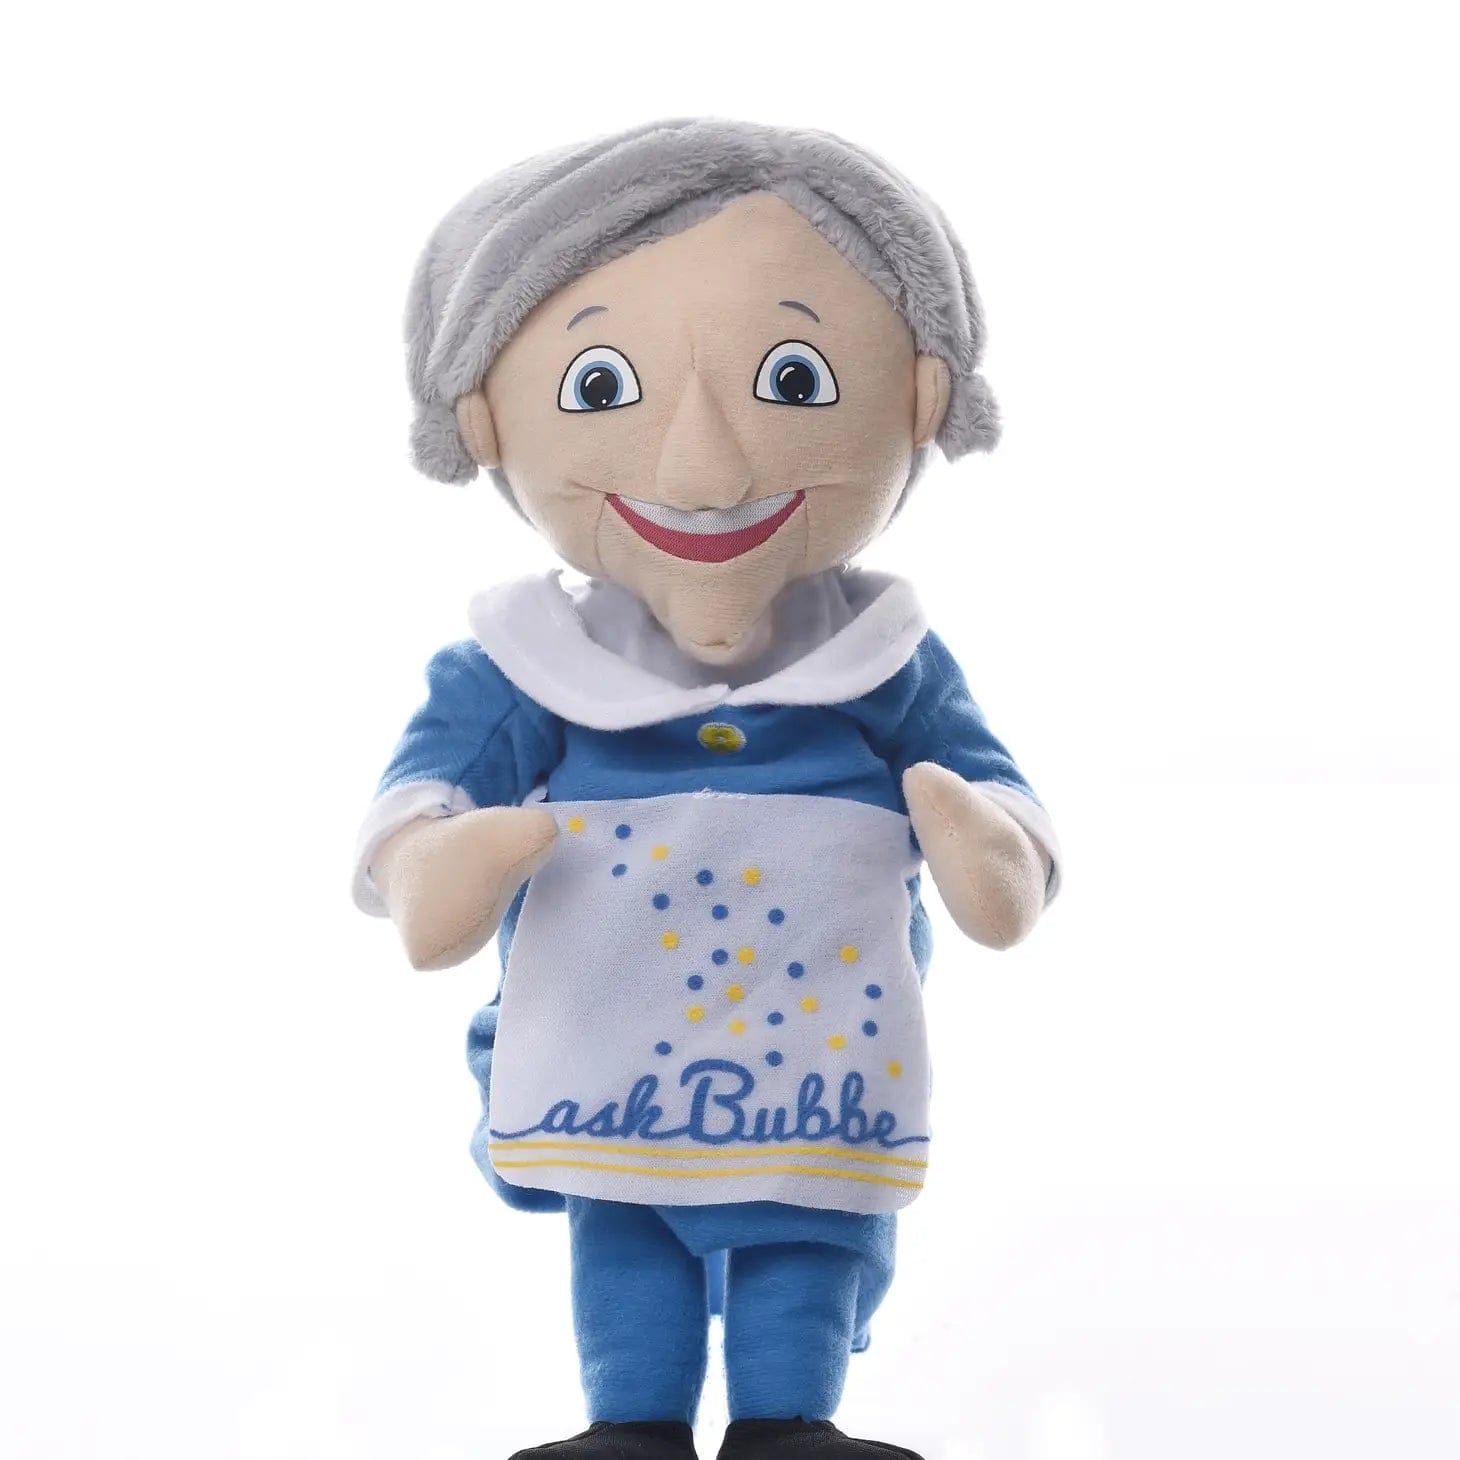 Mensch on a Bench Toys Ask Bubbe - Talking Grandma Doll